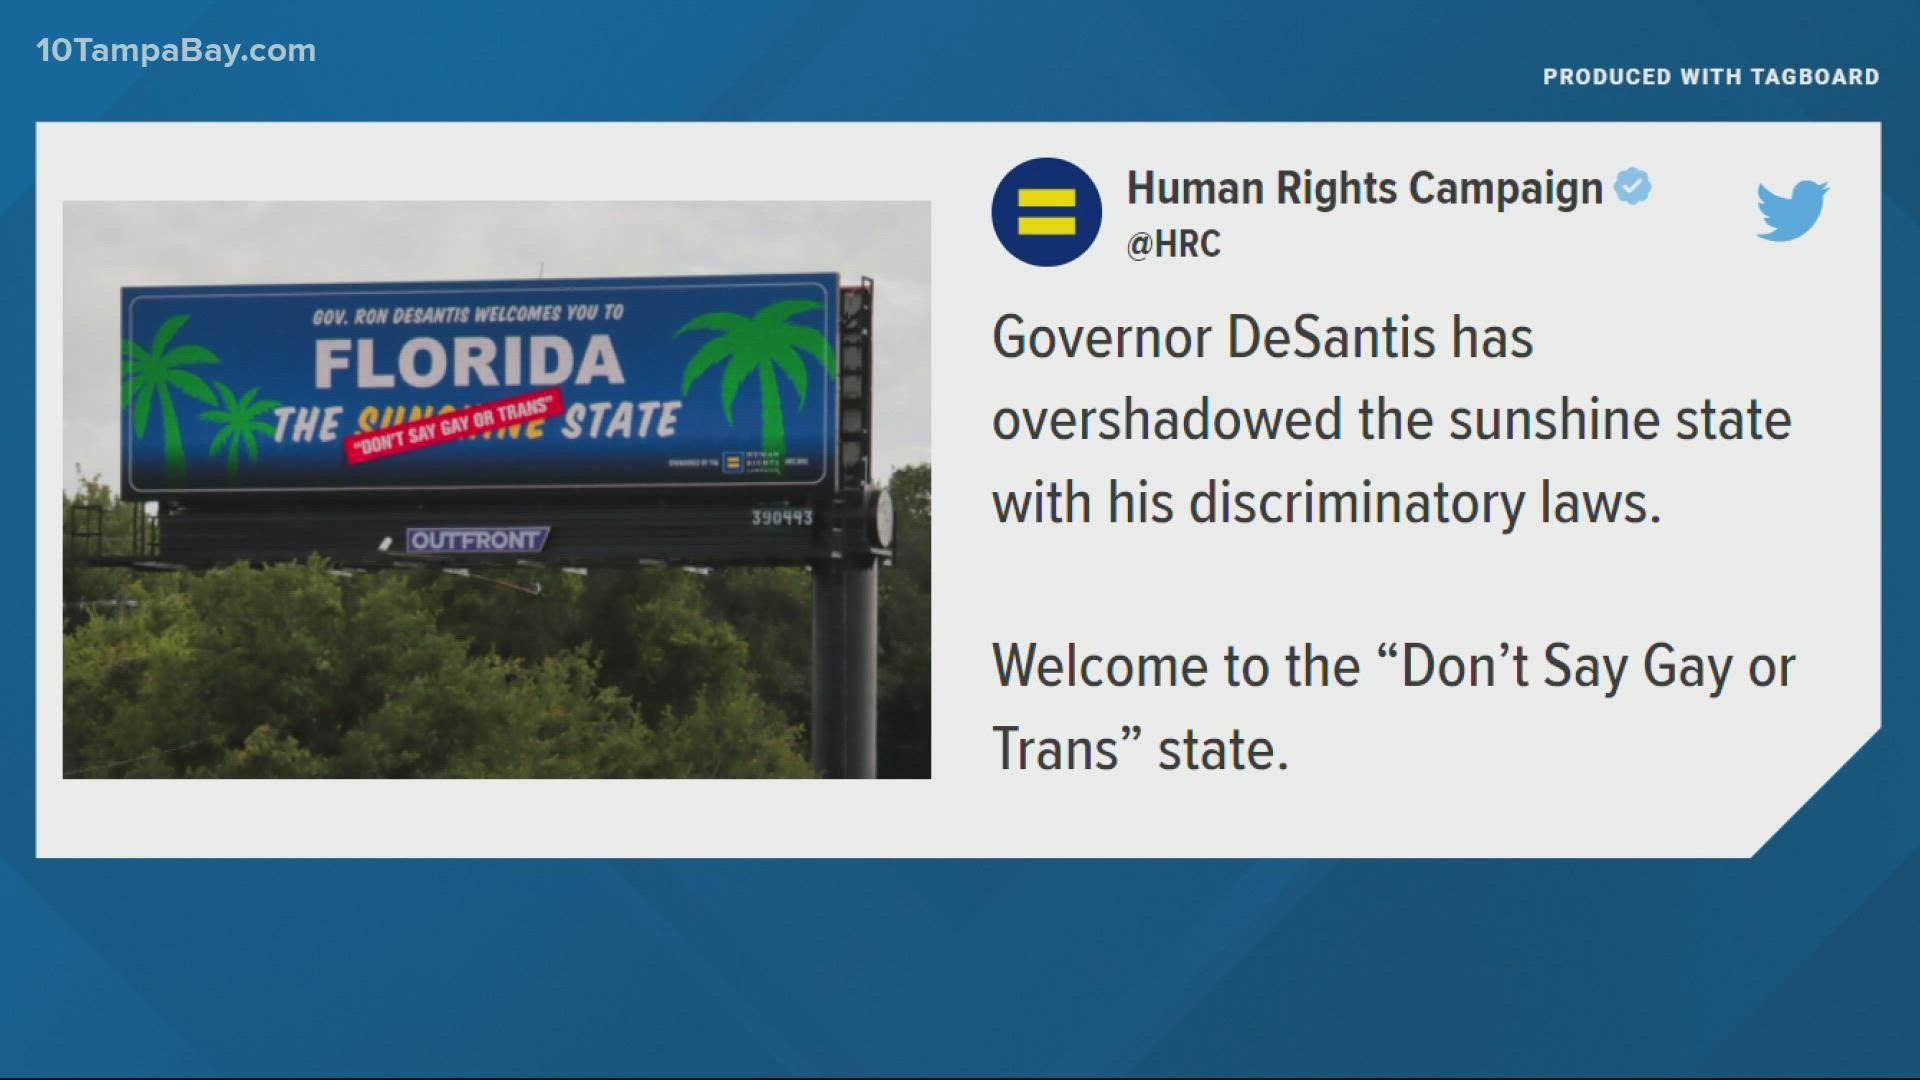 It calls Florida the "Don't Say Gay or Trans State" after DeSantis signed a bill that bars educators from teaching about sexual orientation or gender identity.